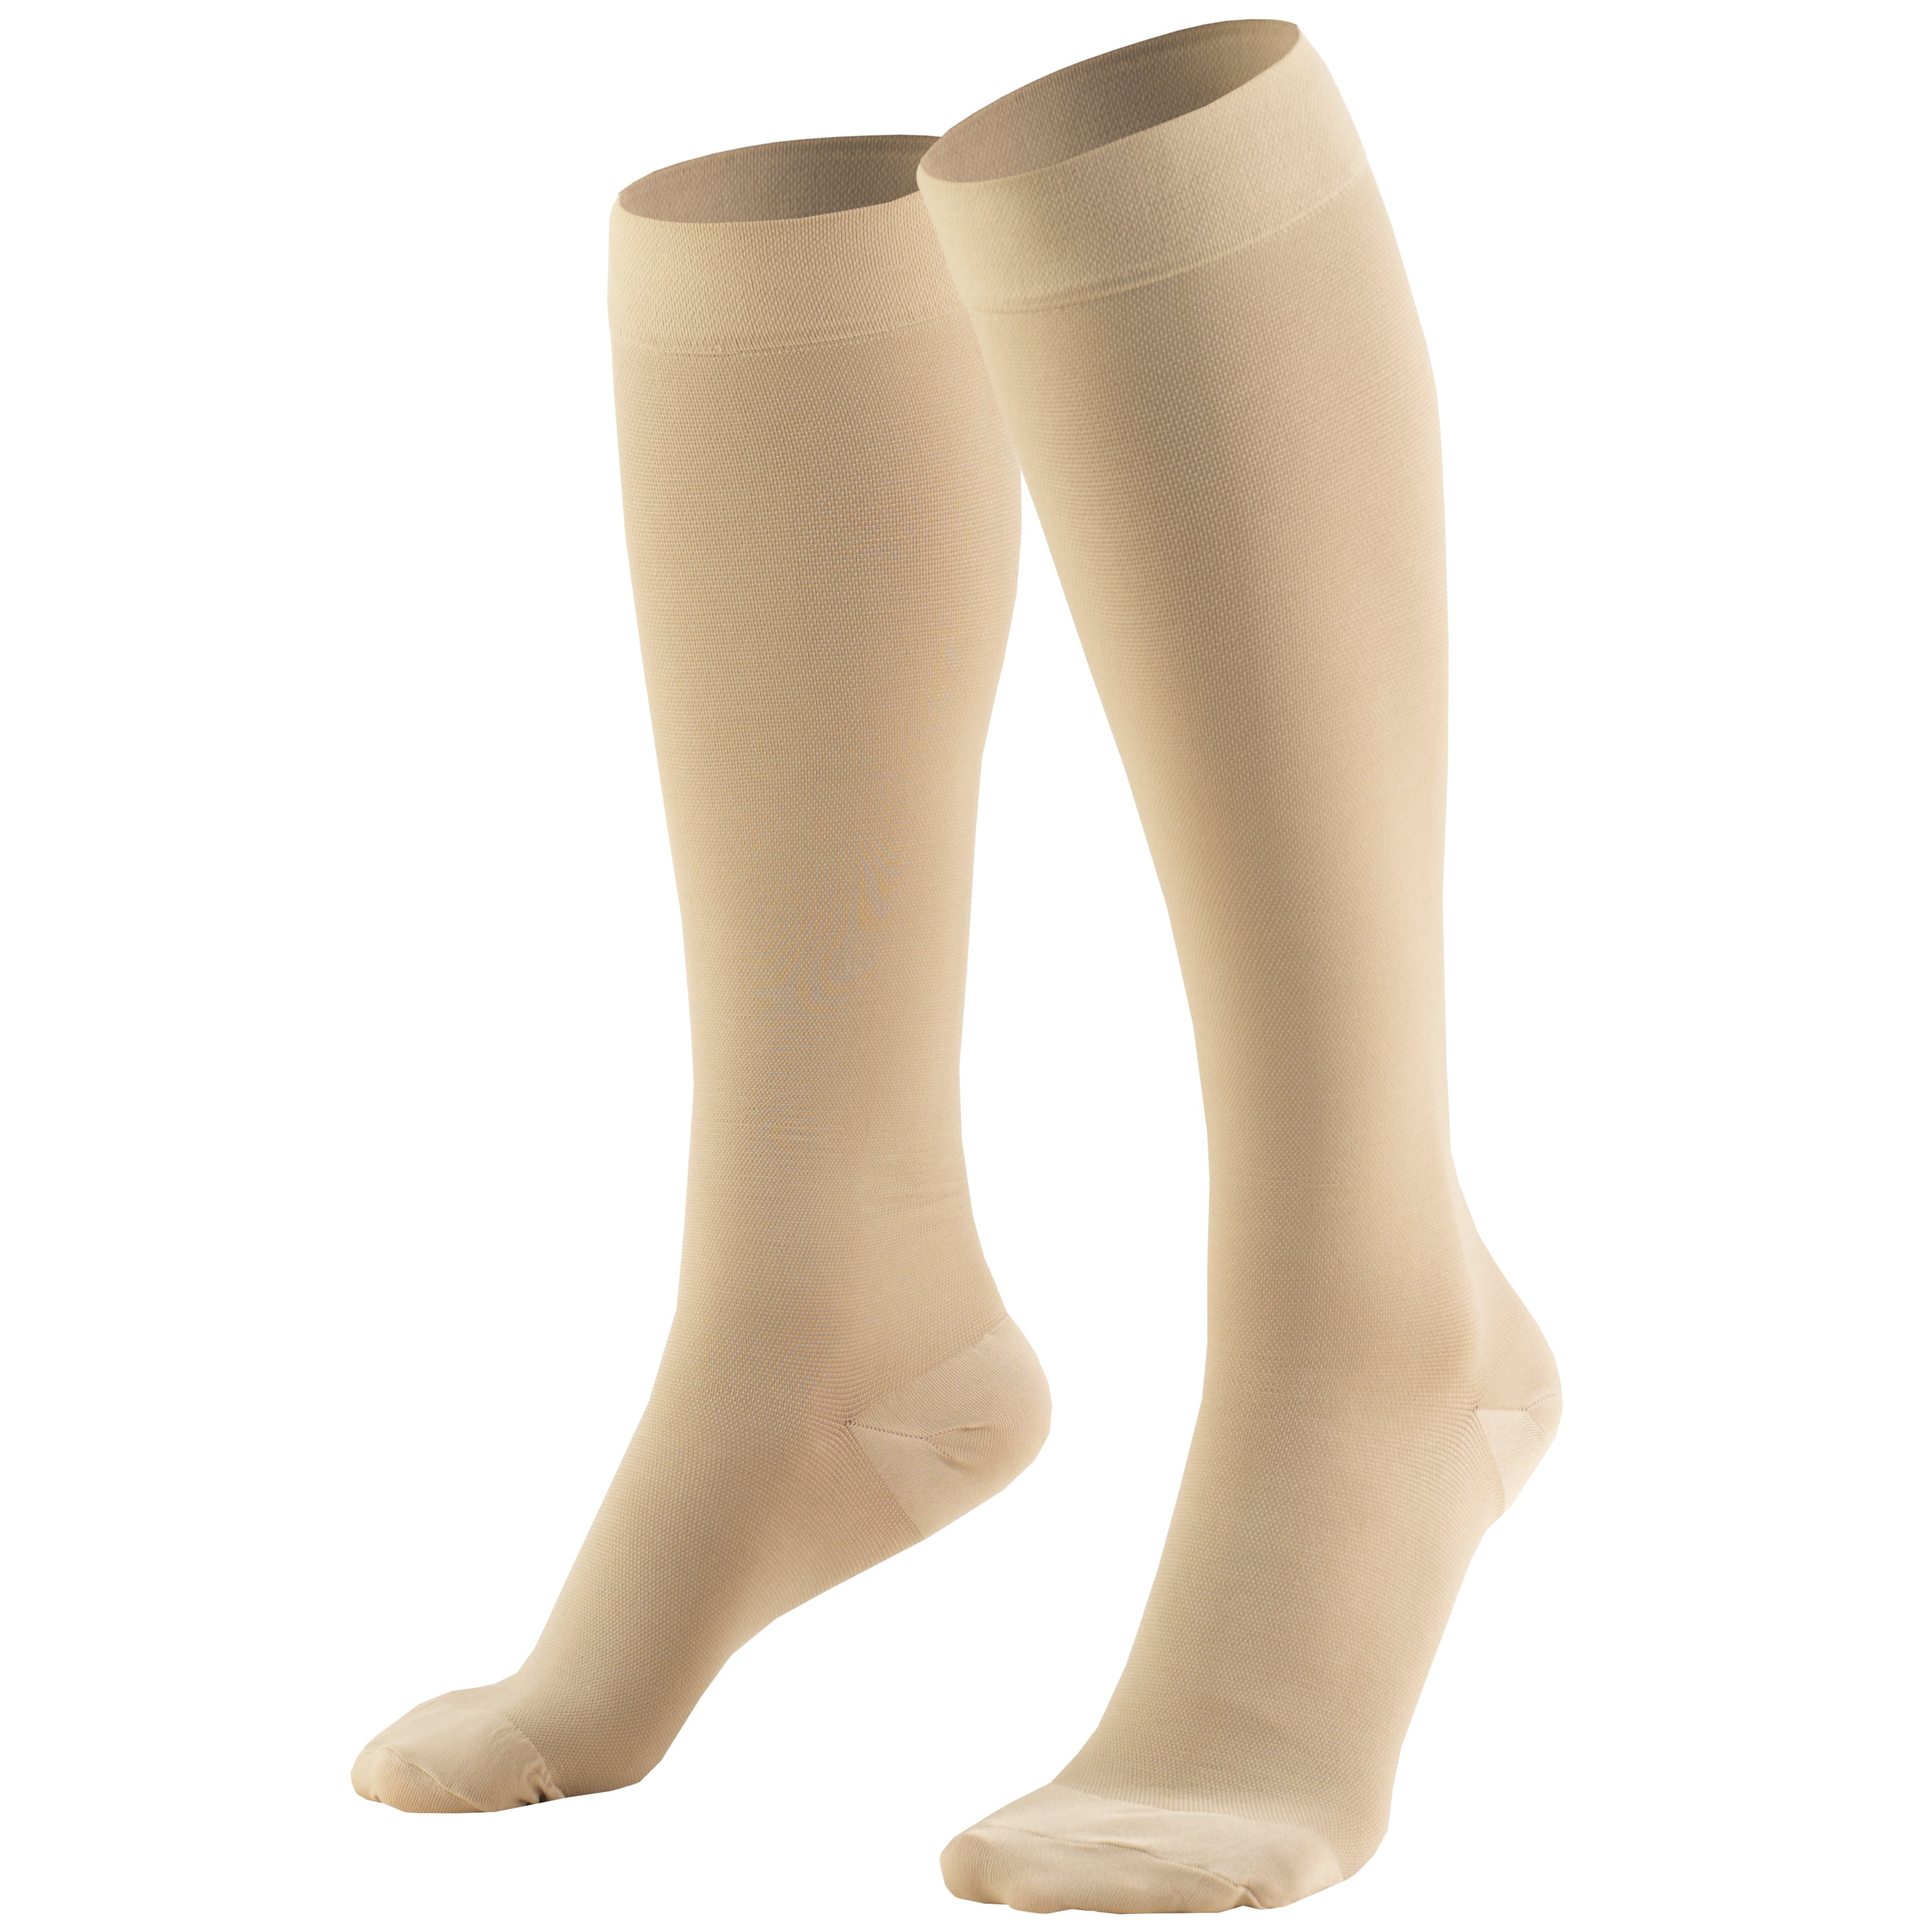 Buy barre socks Online in Cyprus at Low Prices at desertcart